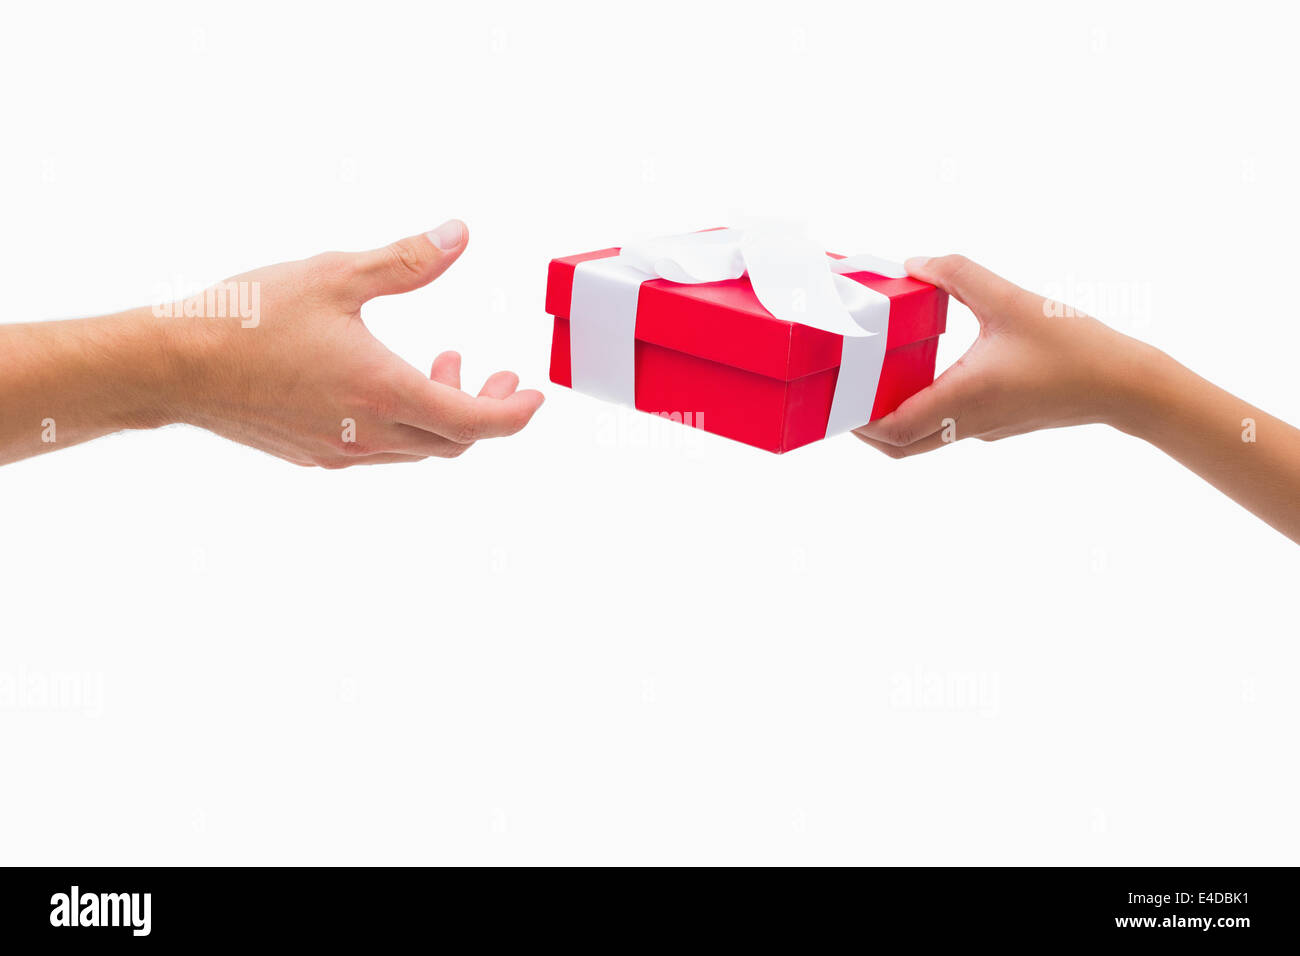 Woman passing man a gift Stock Photo